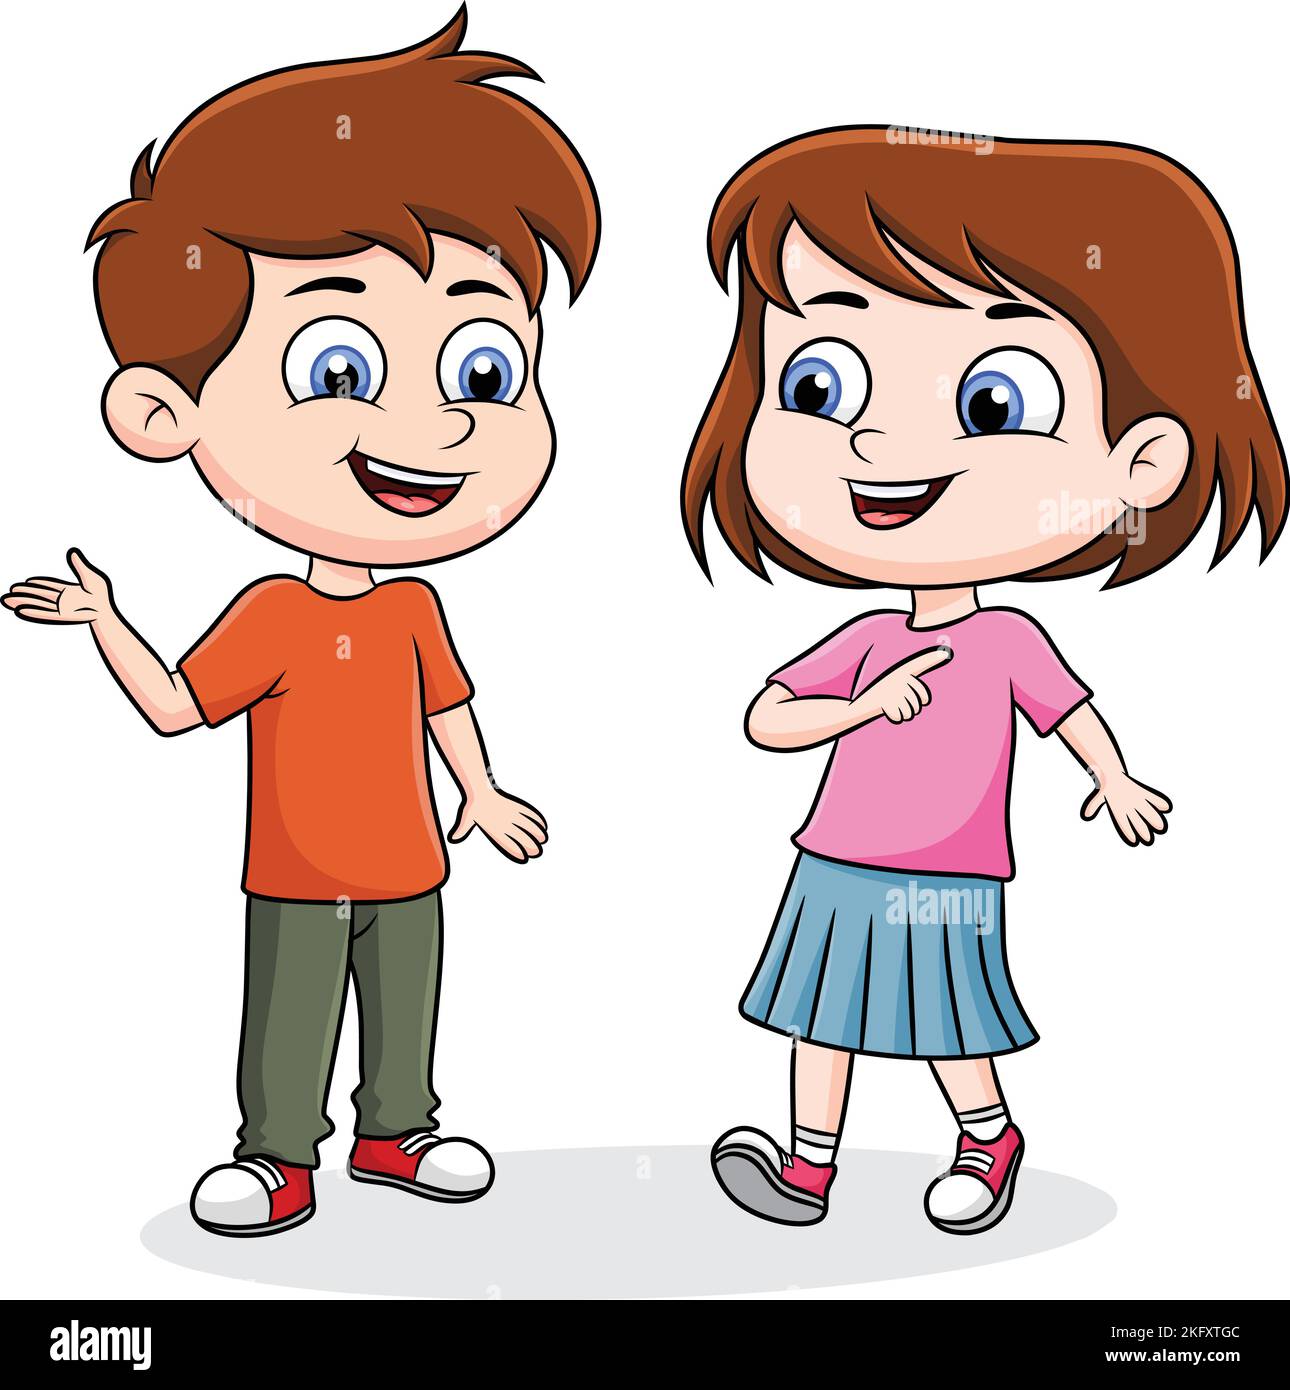 Two cute kids talking to each other cartoon vector illustration Stock Vector